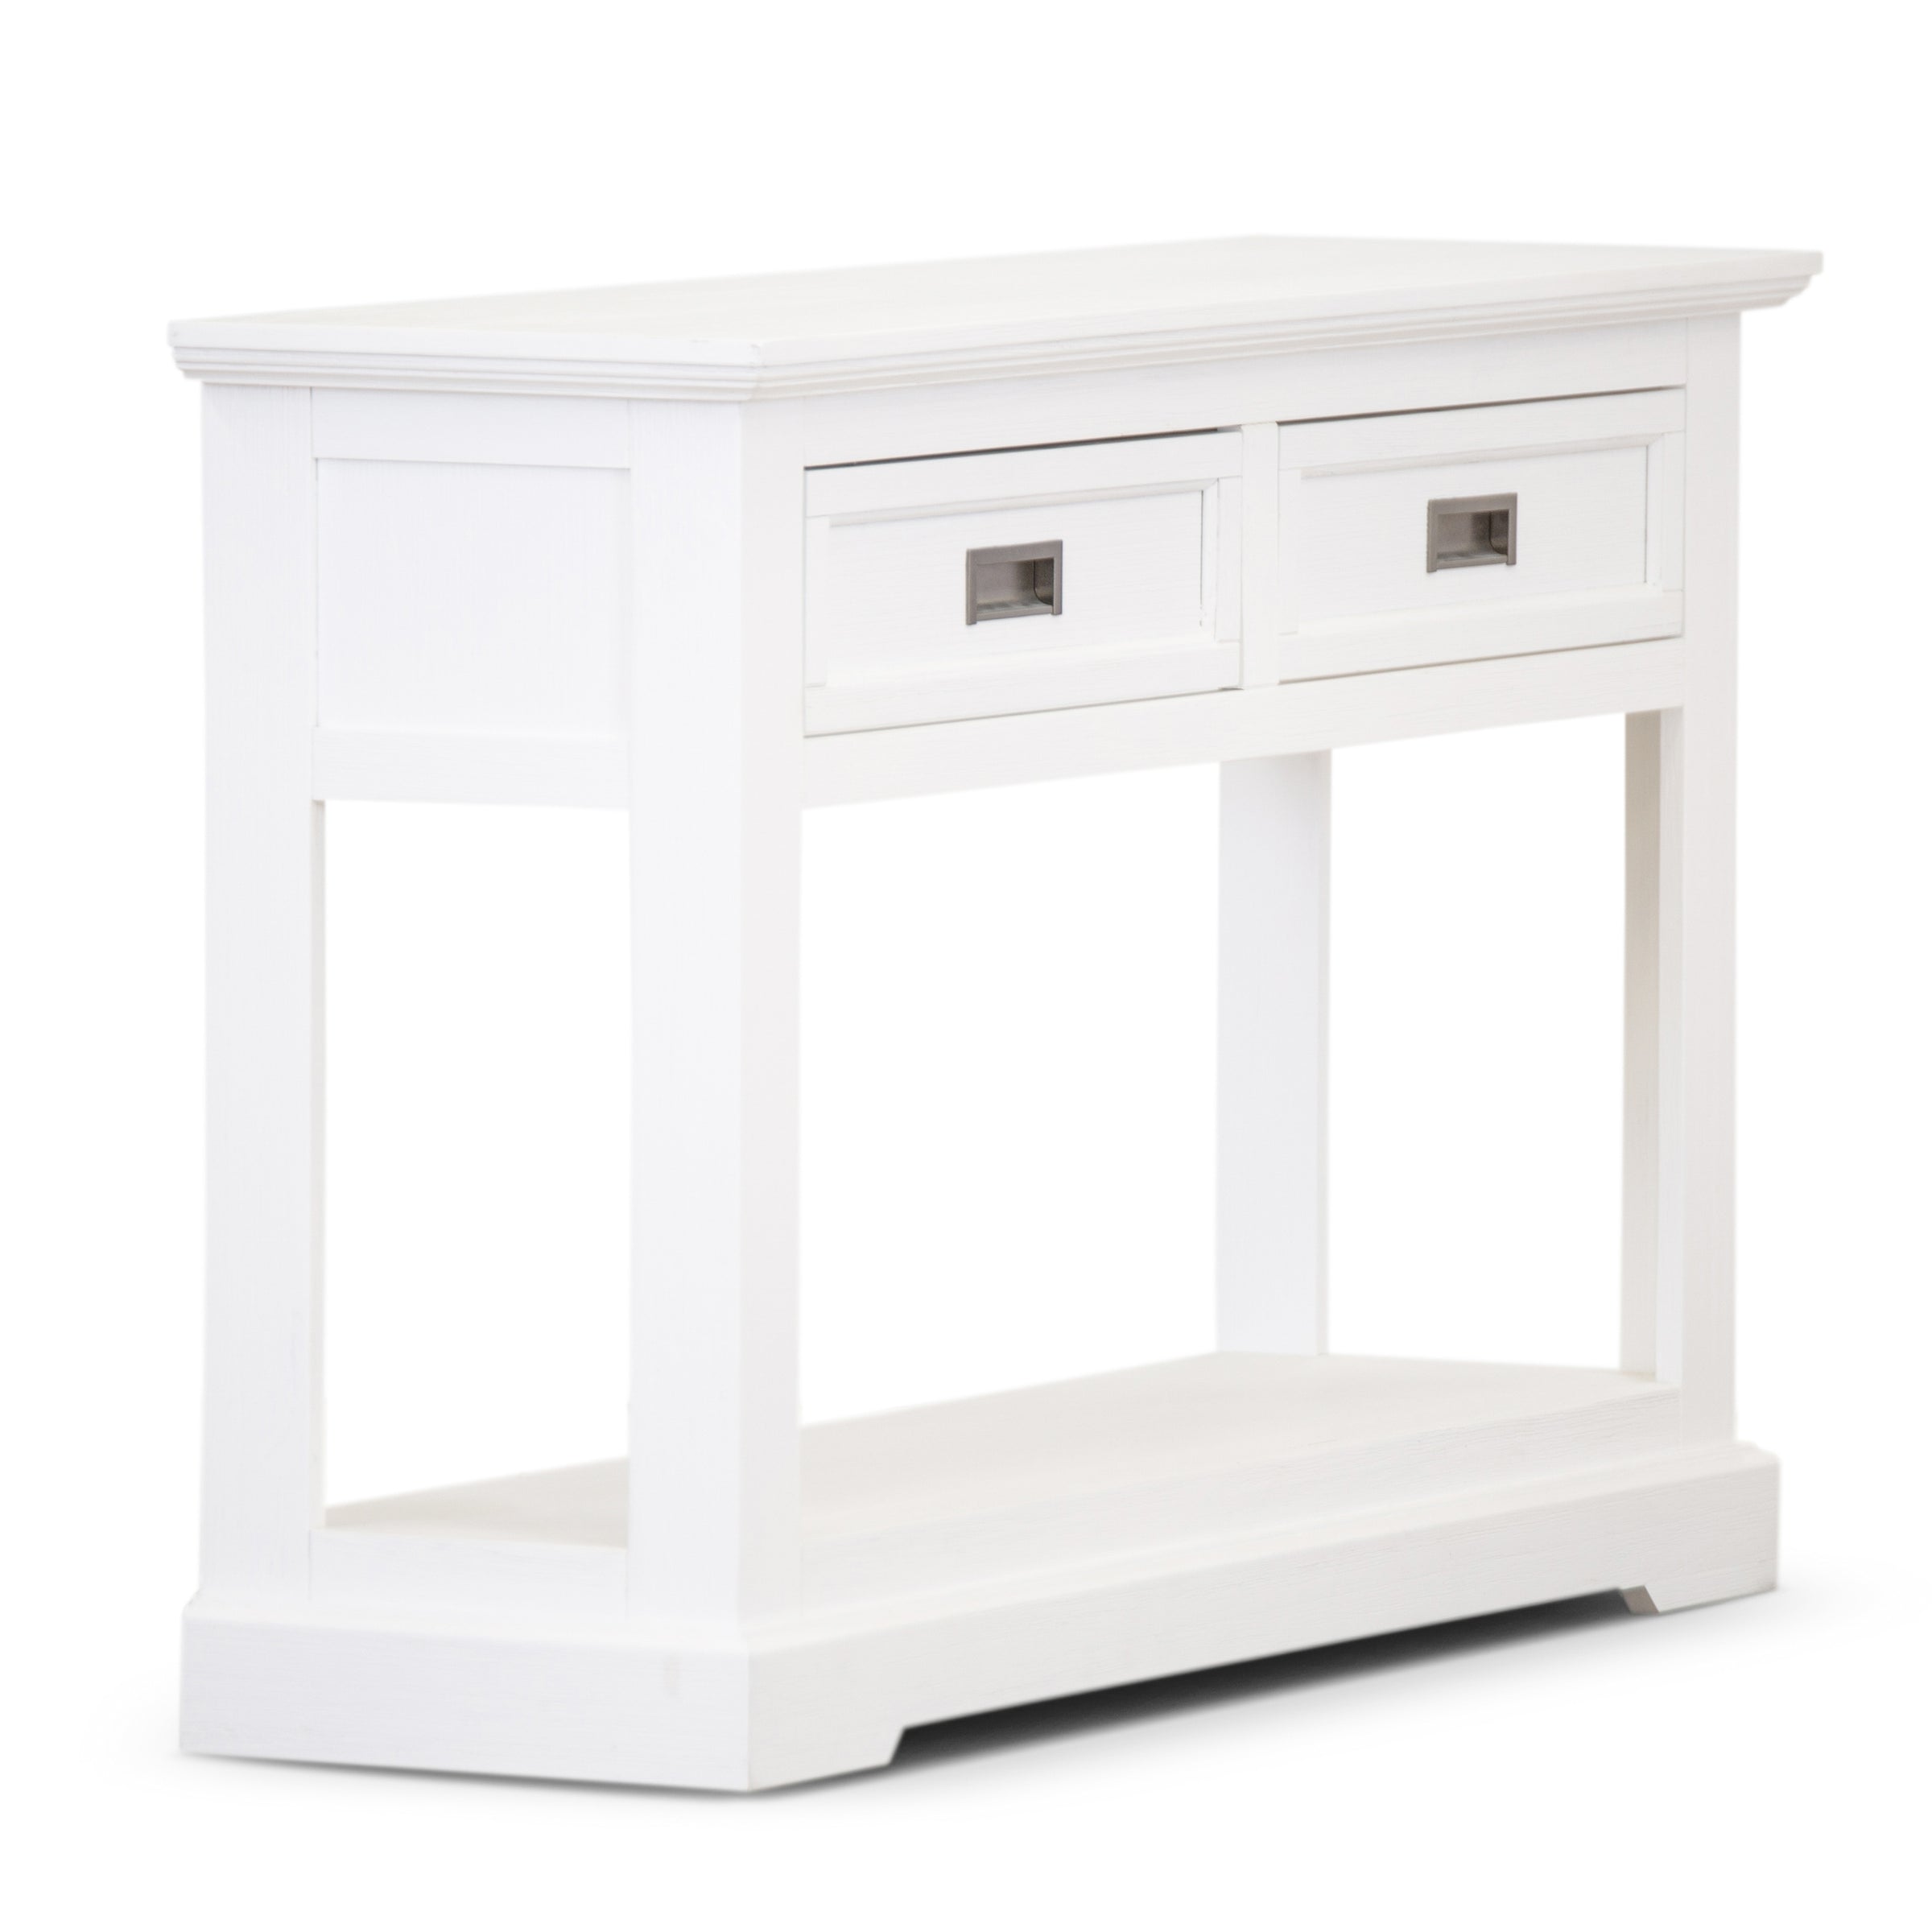 Laelia Console Table with Solid Acacia Timber in White - 125cm - Notbrand